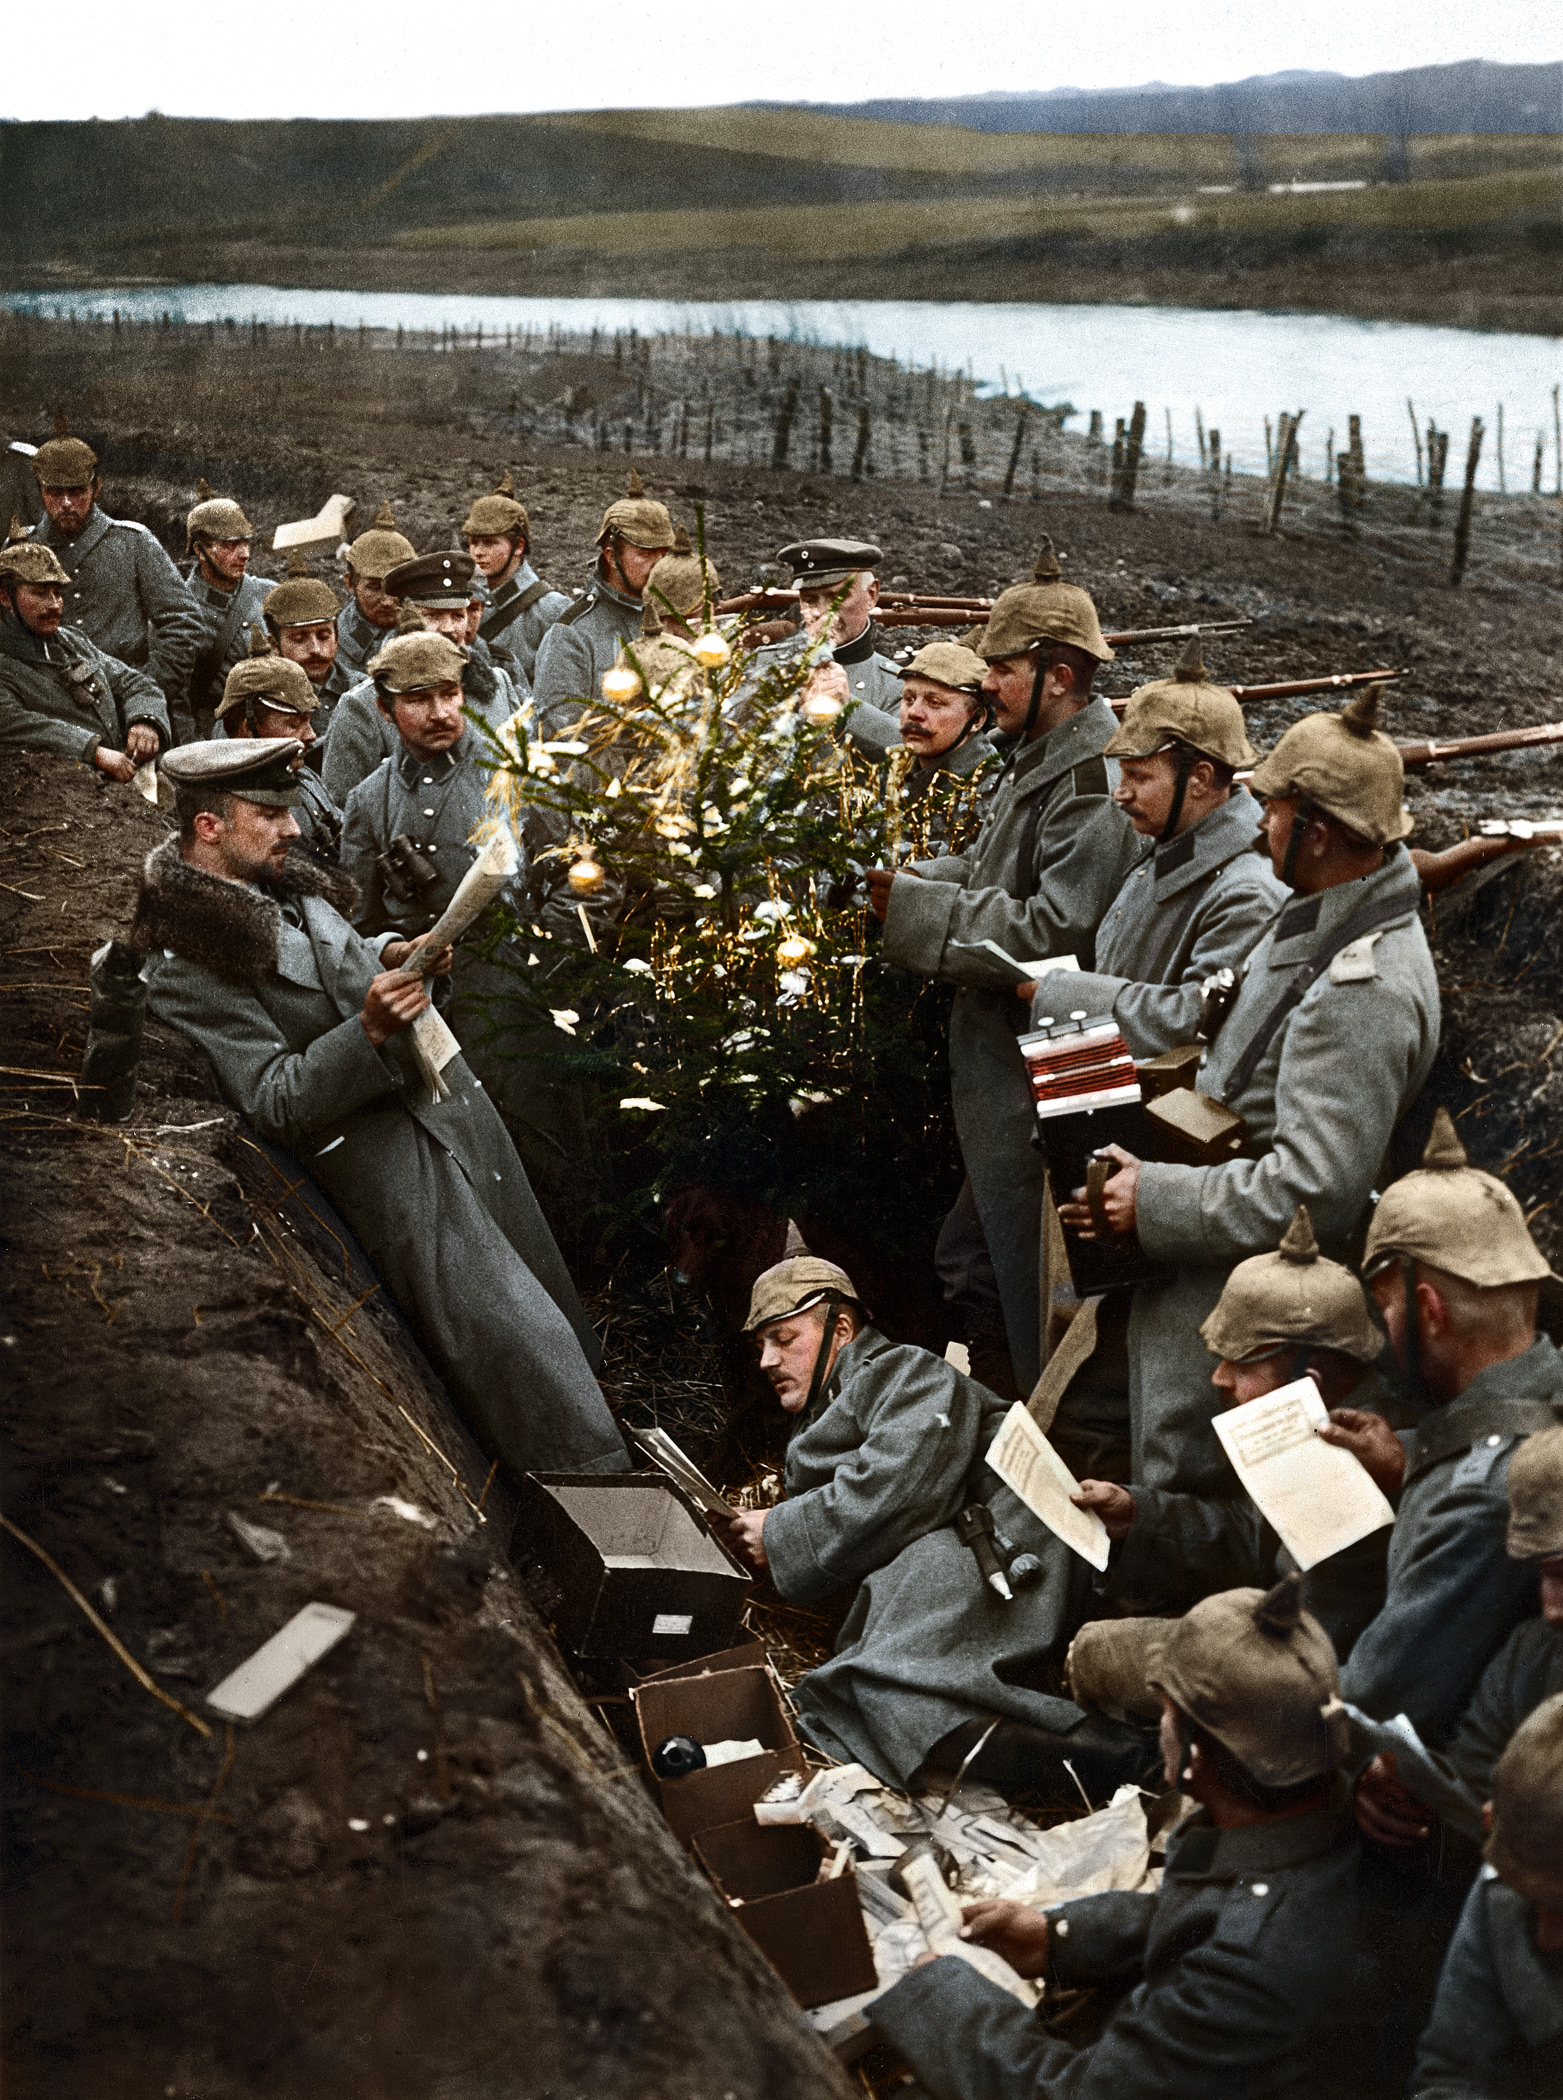 German troops singing around a Christmas tree in their trench on the Eastern Front during World War I.